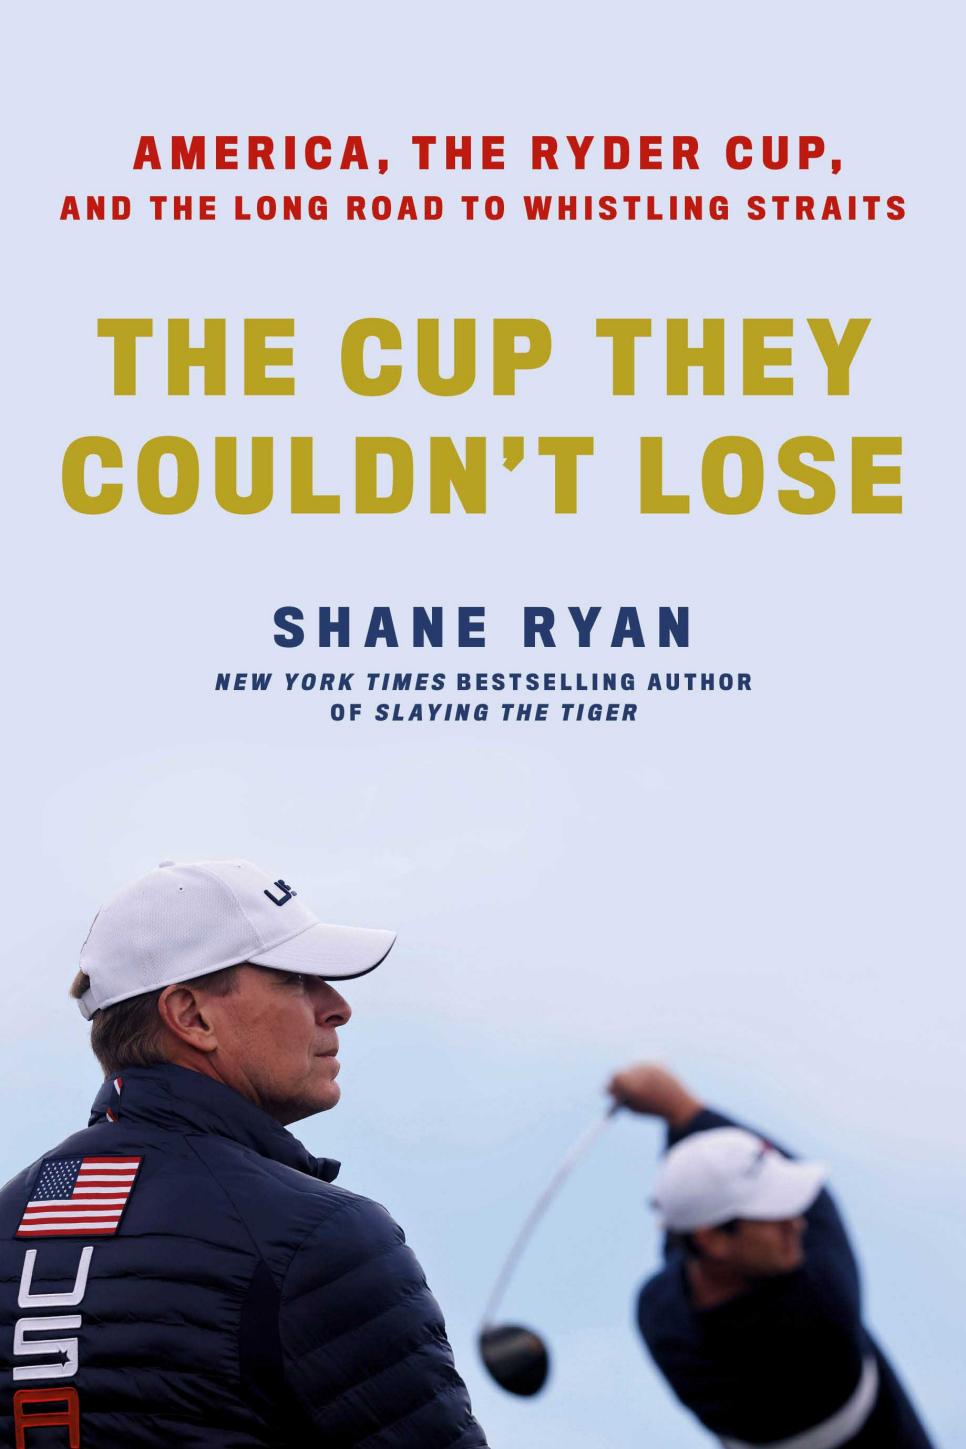 /content/dam/images/golfdigest/fullset/2022/5/the-cup-they-couldnt-lose-book-cover-shane-ryan.jpg